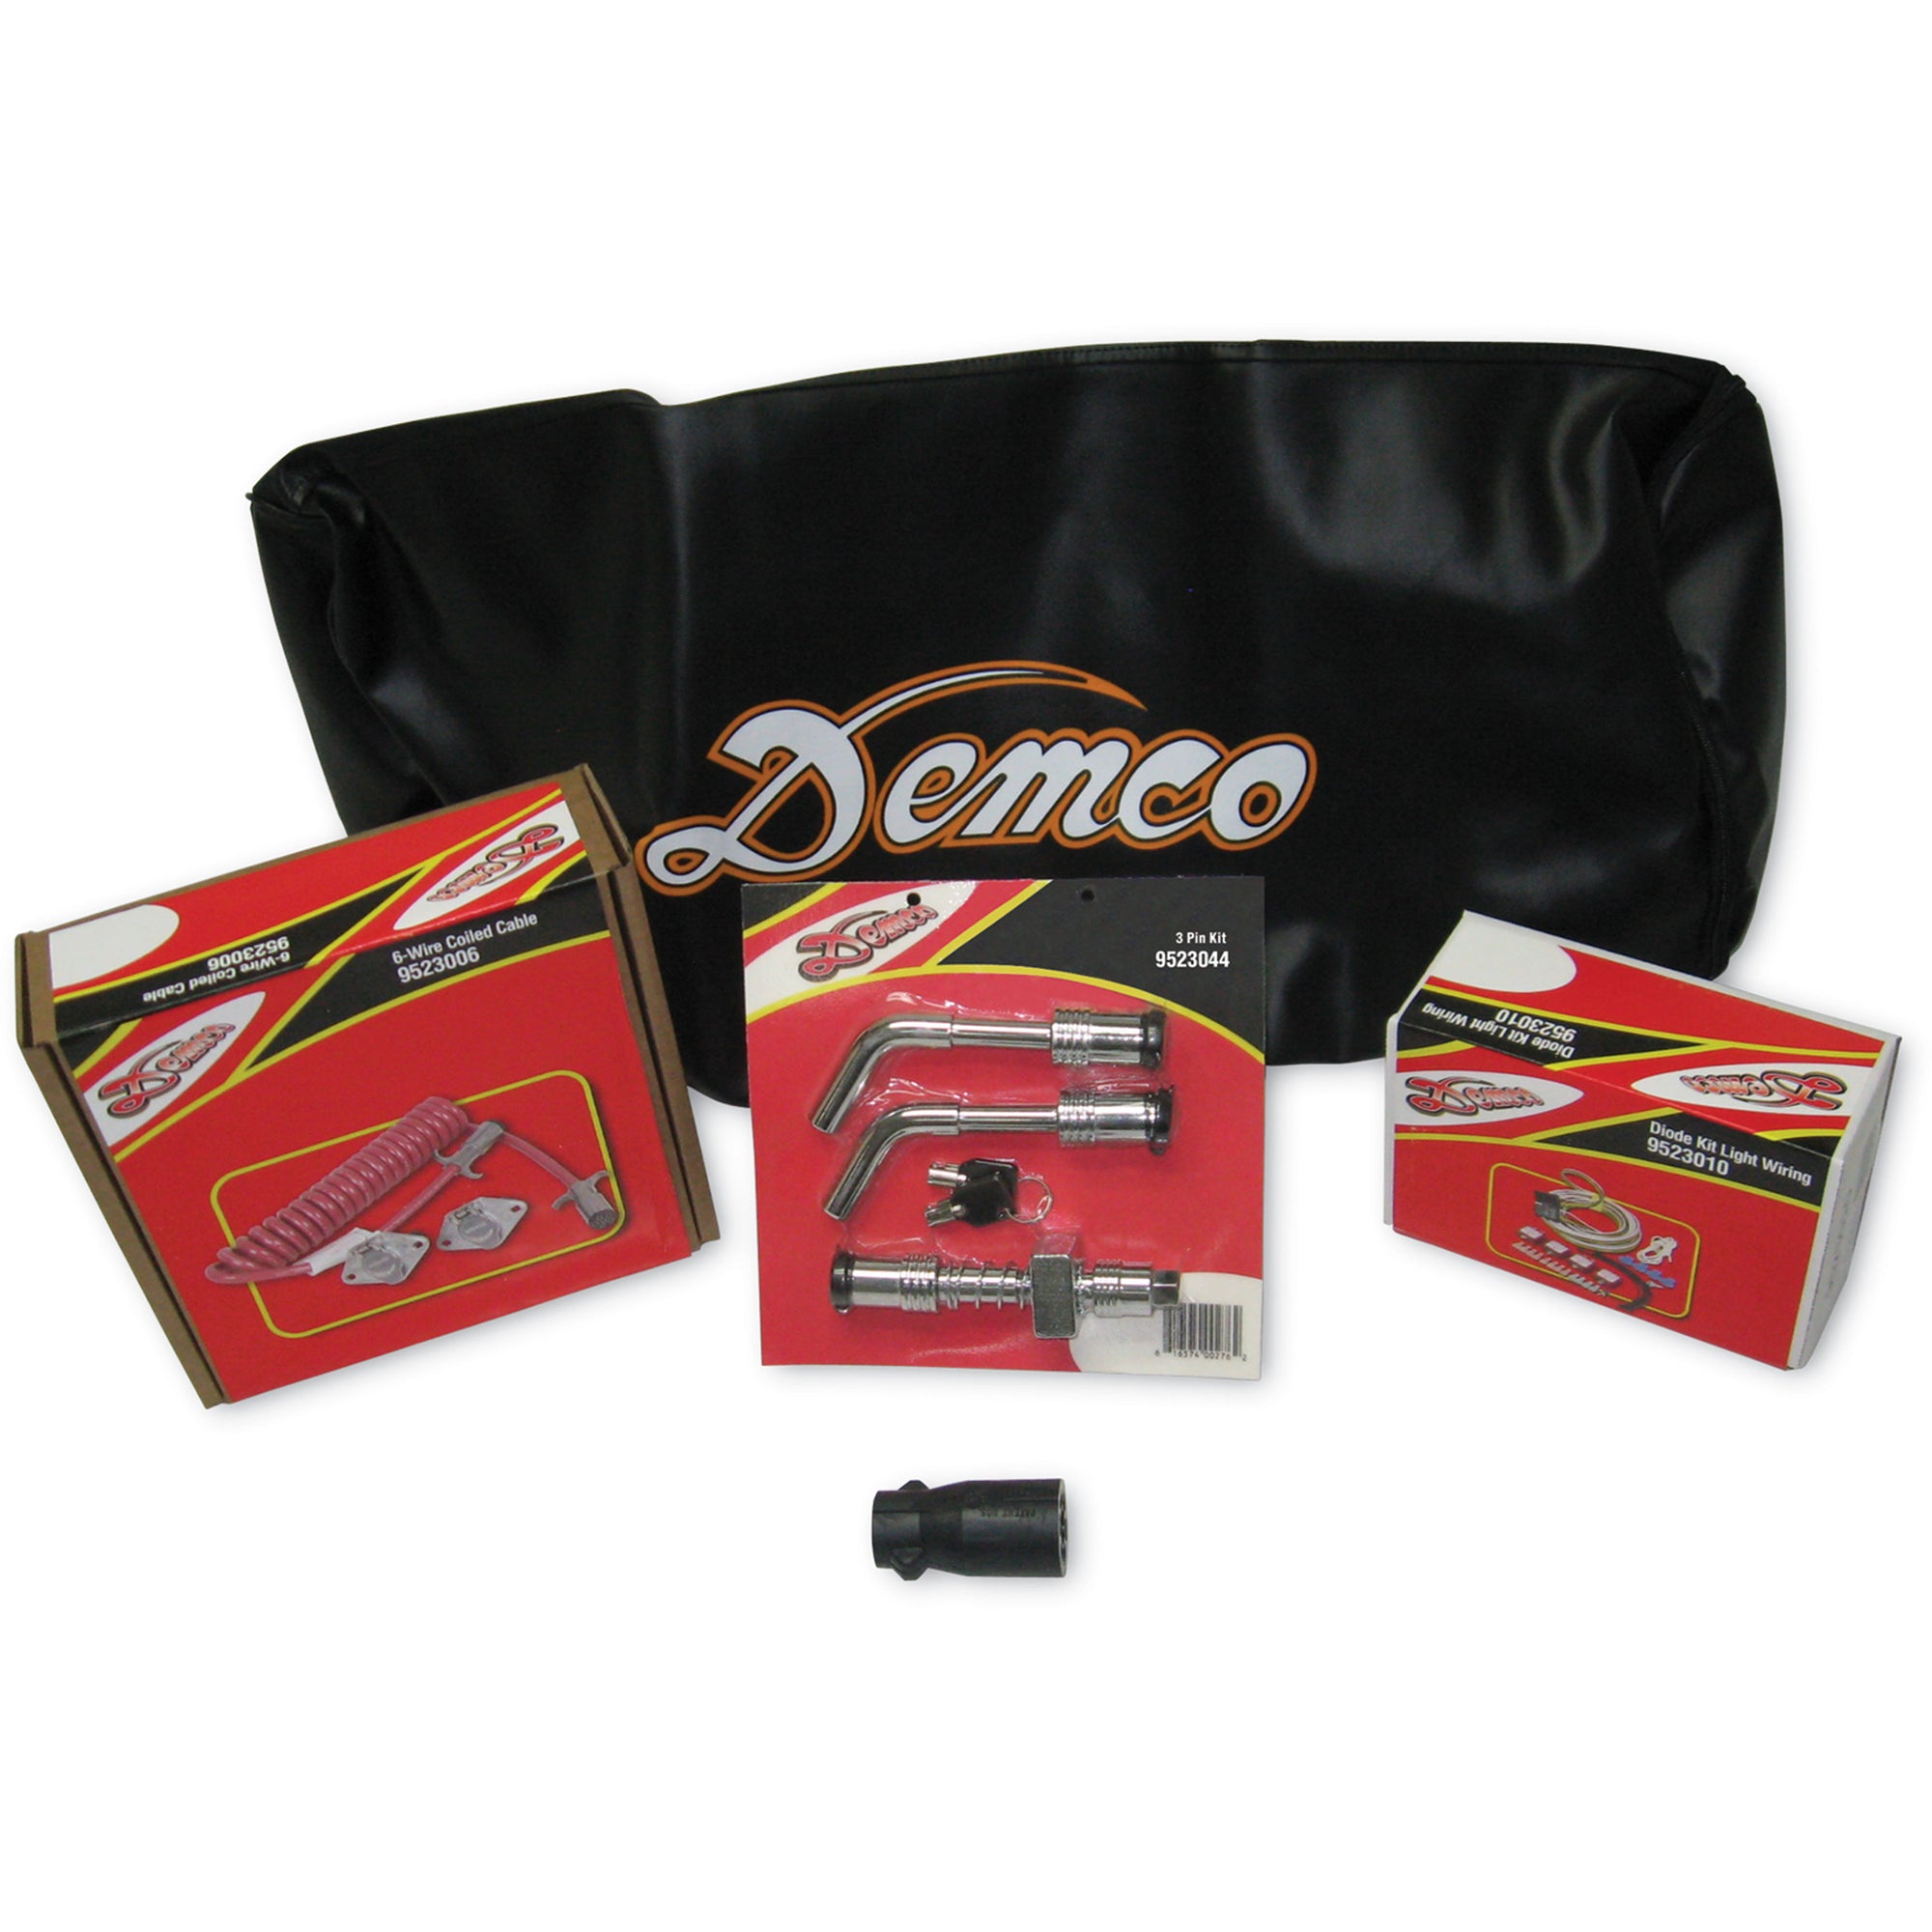 Demco 9523057 Towing Combo Kit - Diode System